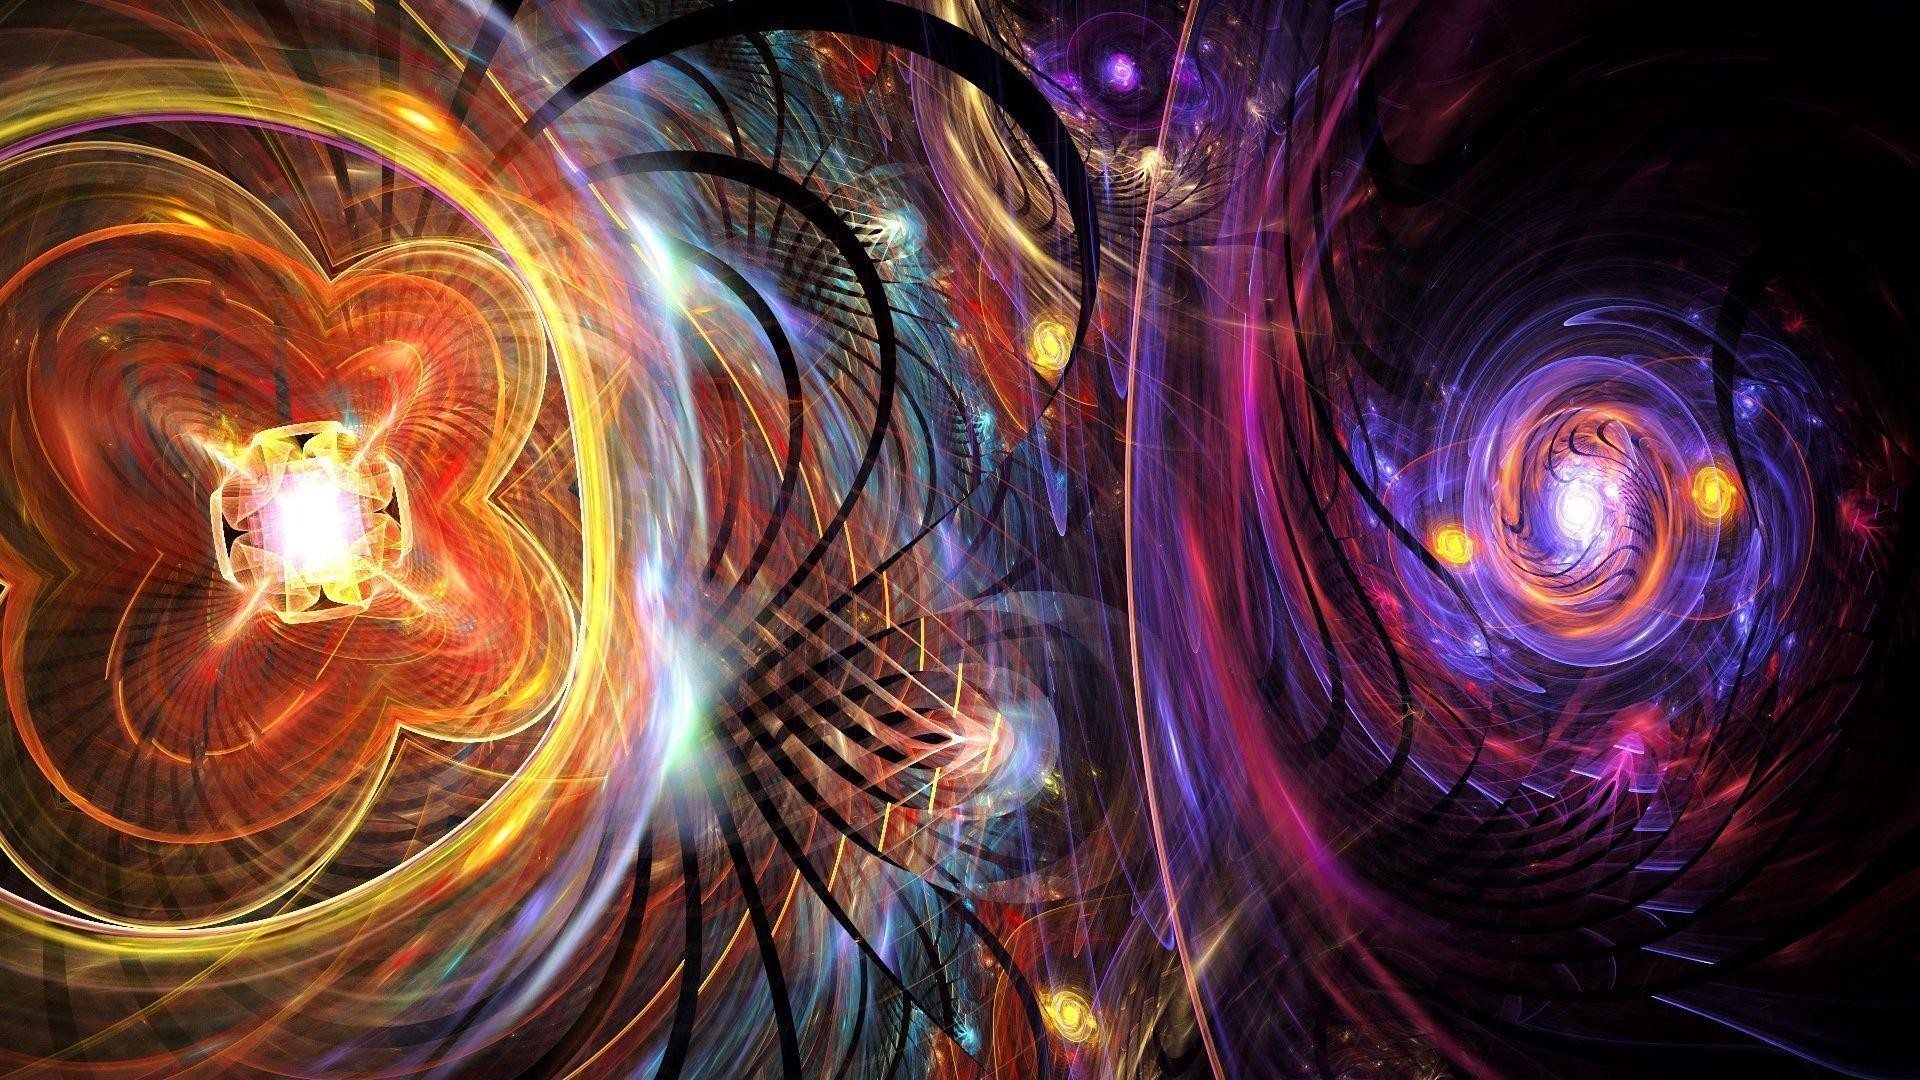 Trippy Hd Space Wallpapers Hd Trippy Space Wallpapers Viewing